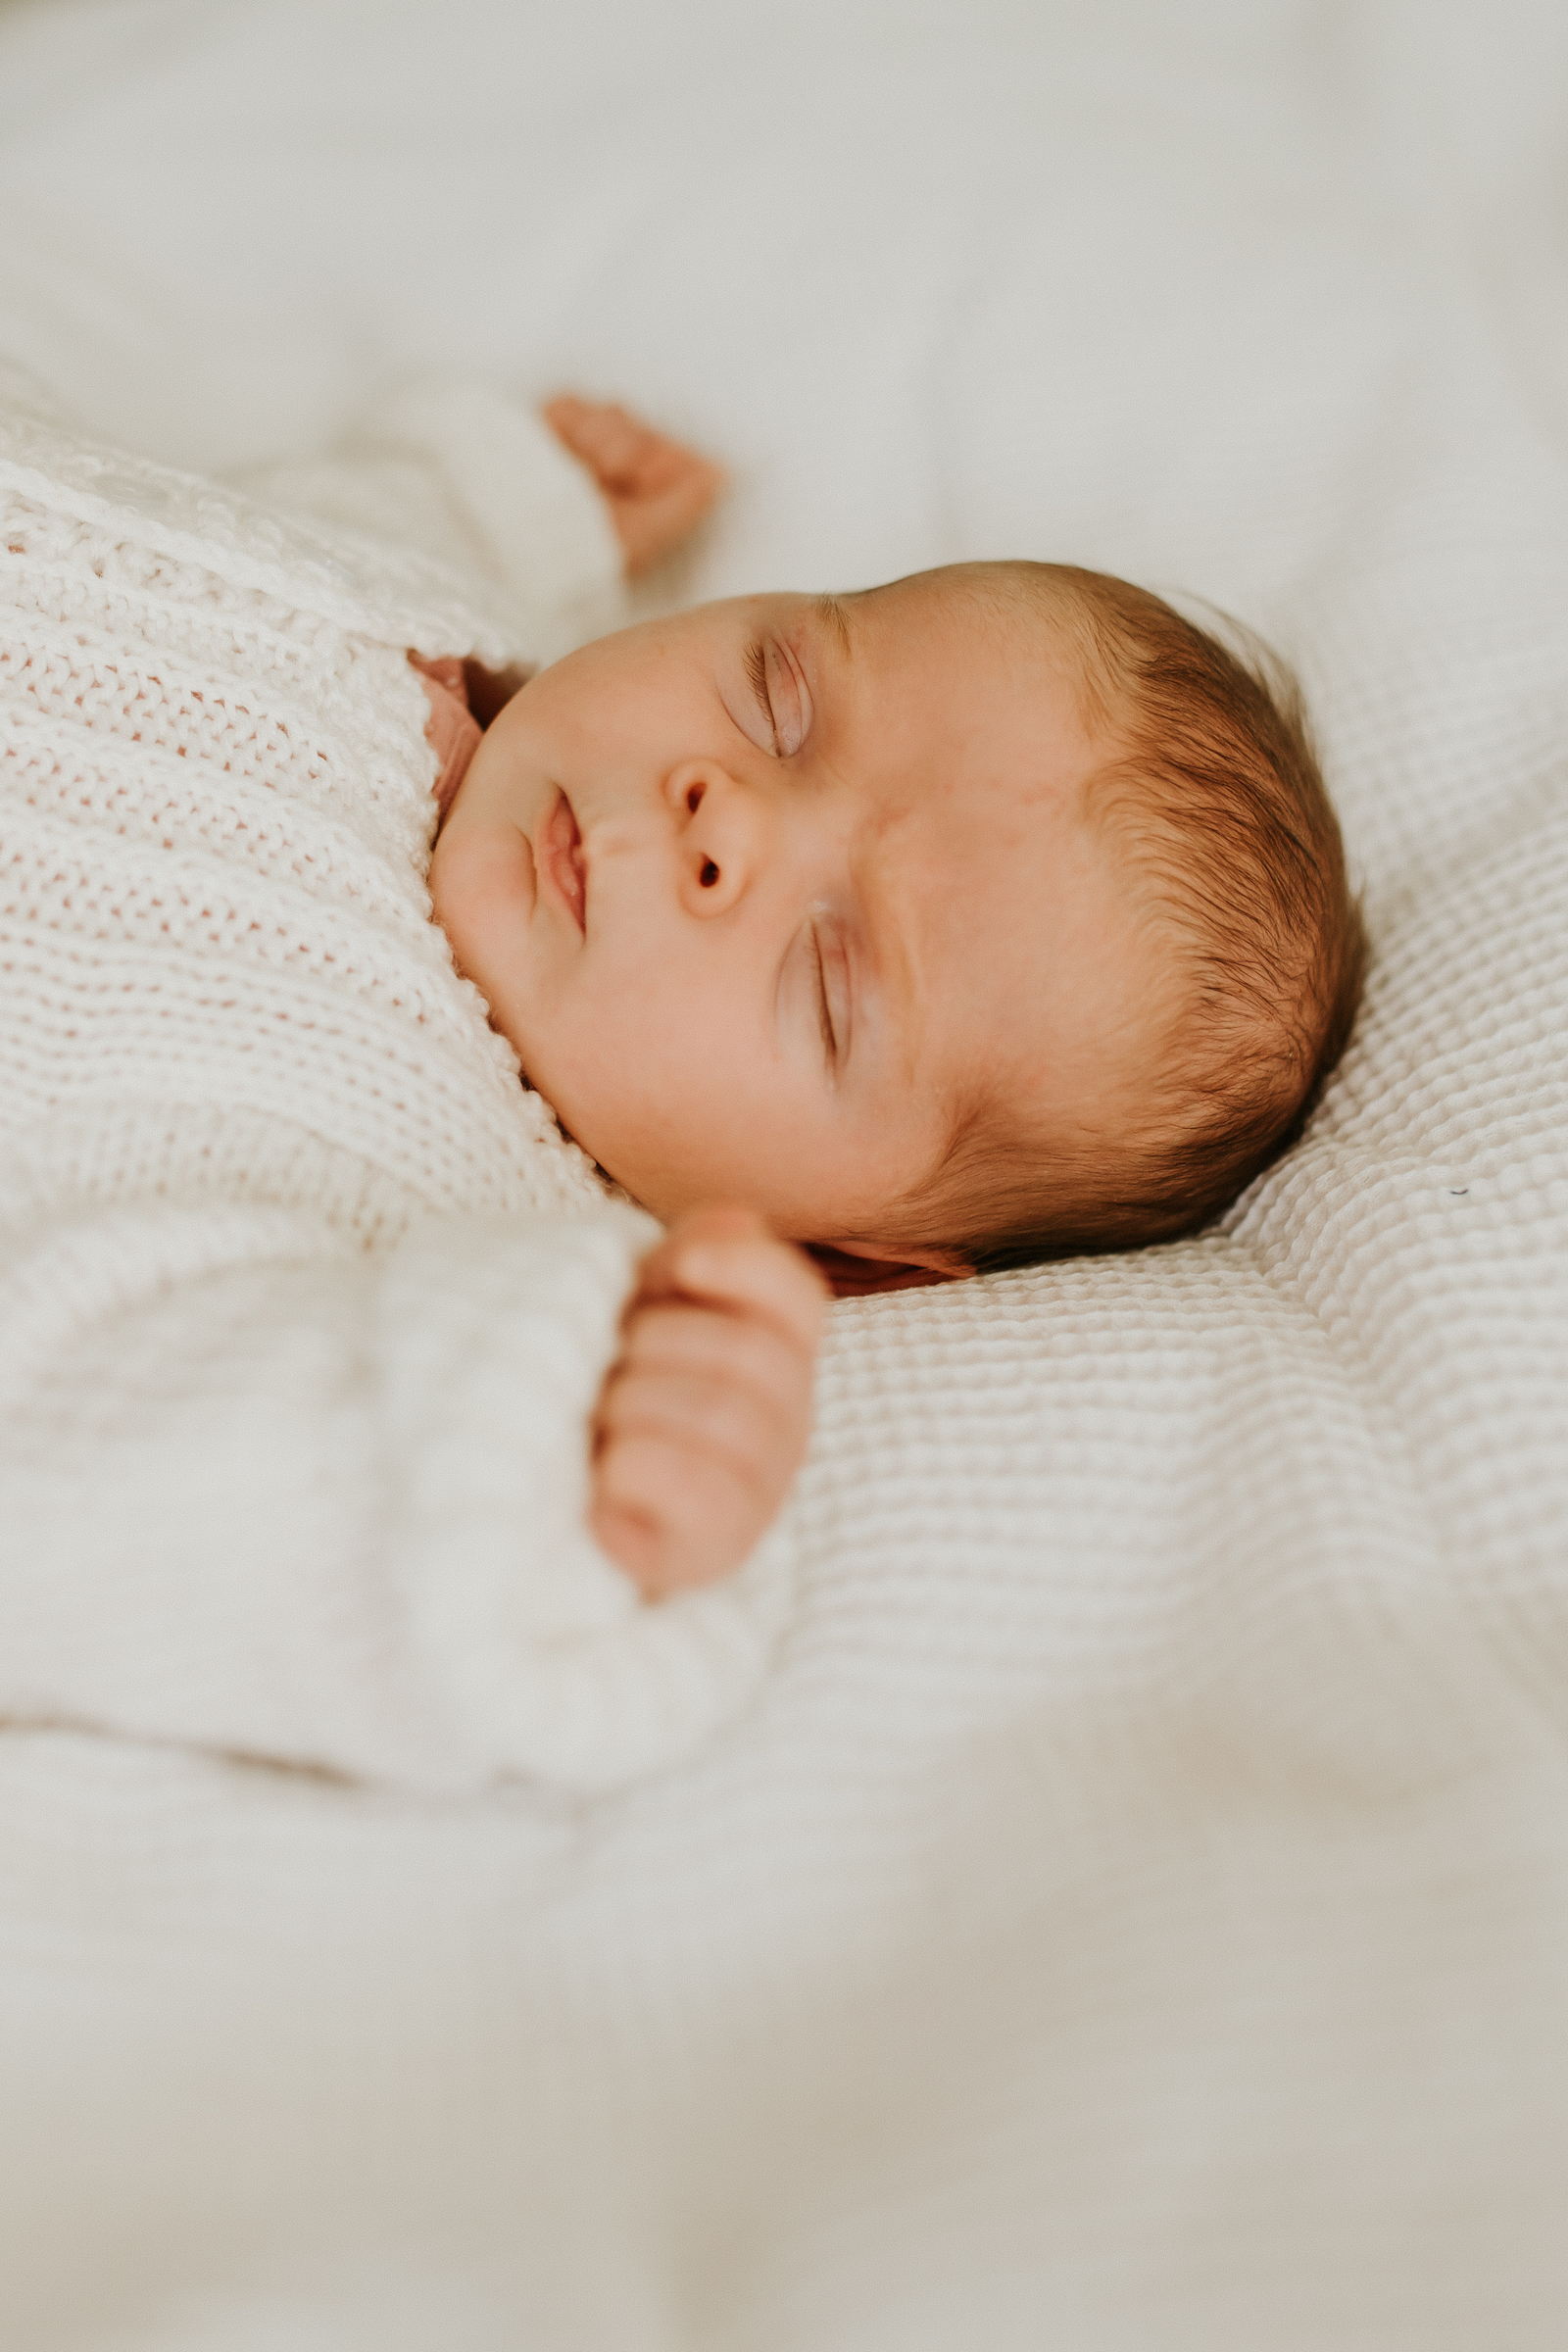 Newborn baby on white bed sheets